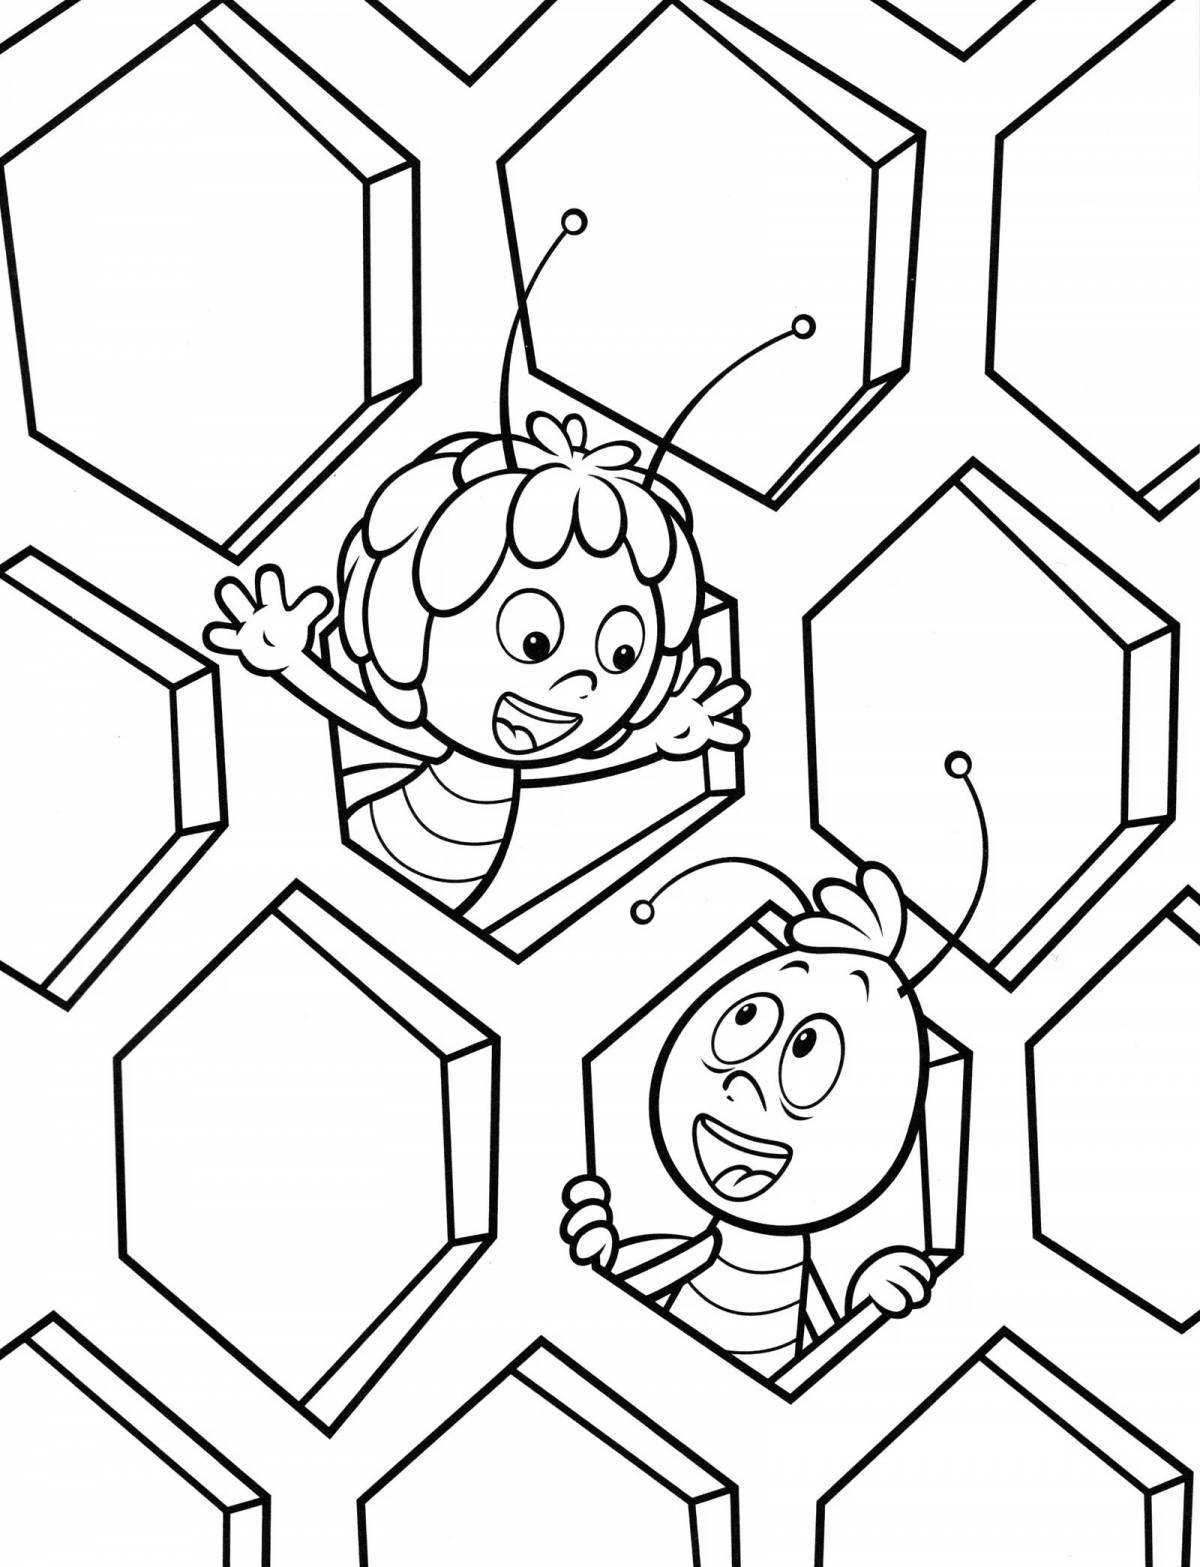 Coloring book happy honeycombs for students